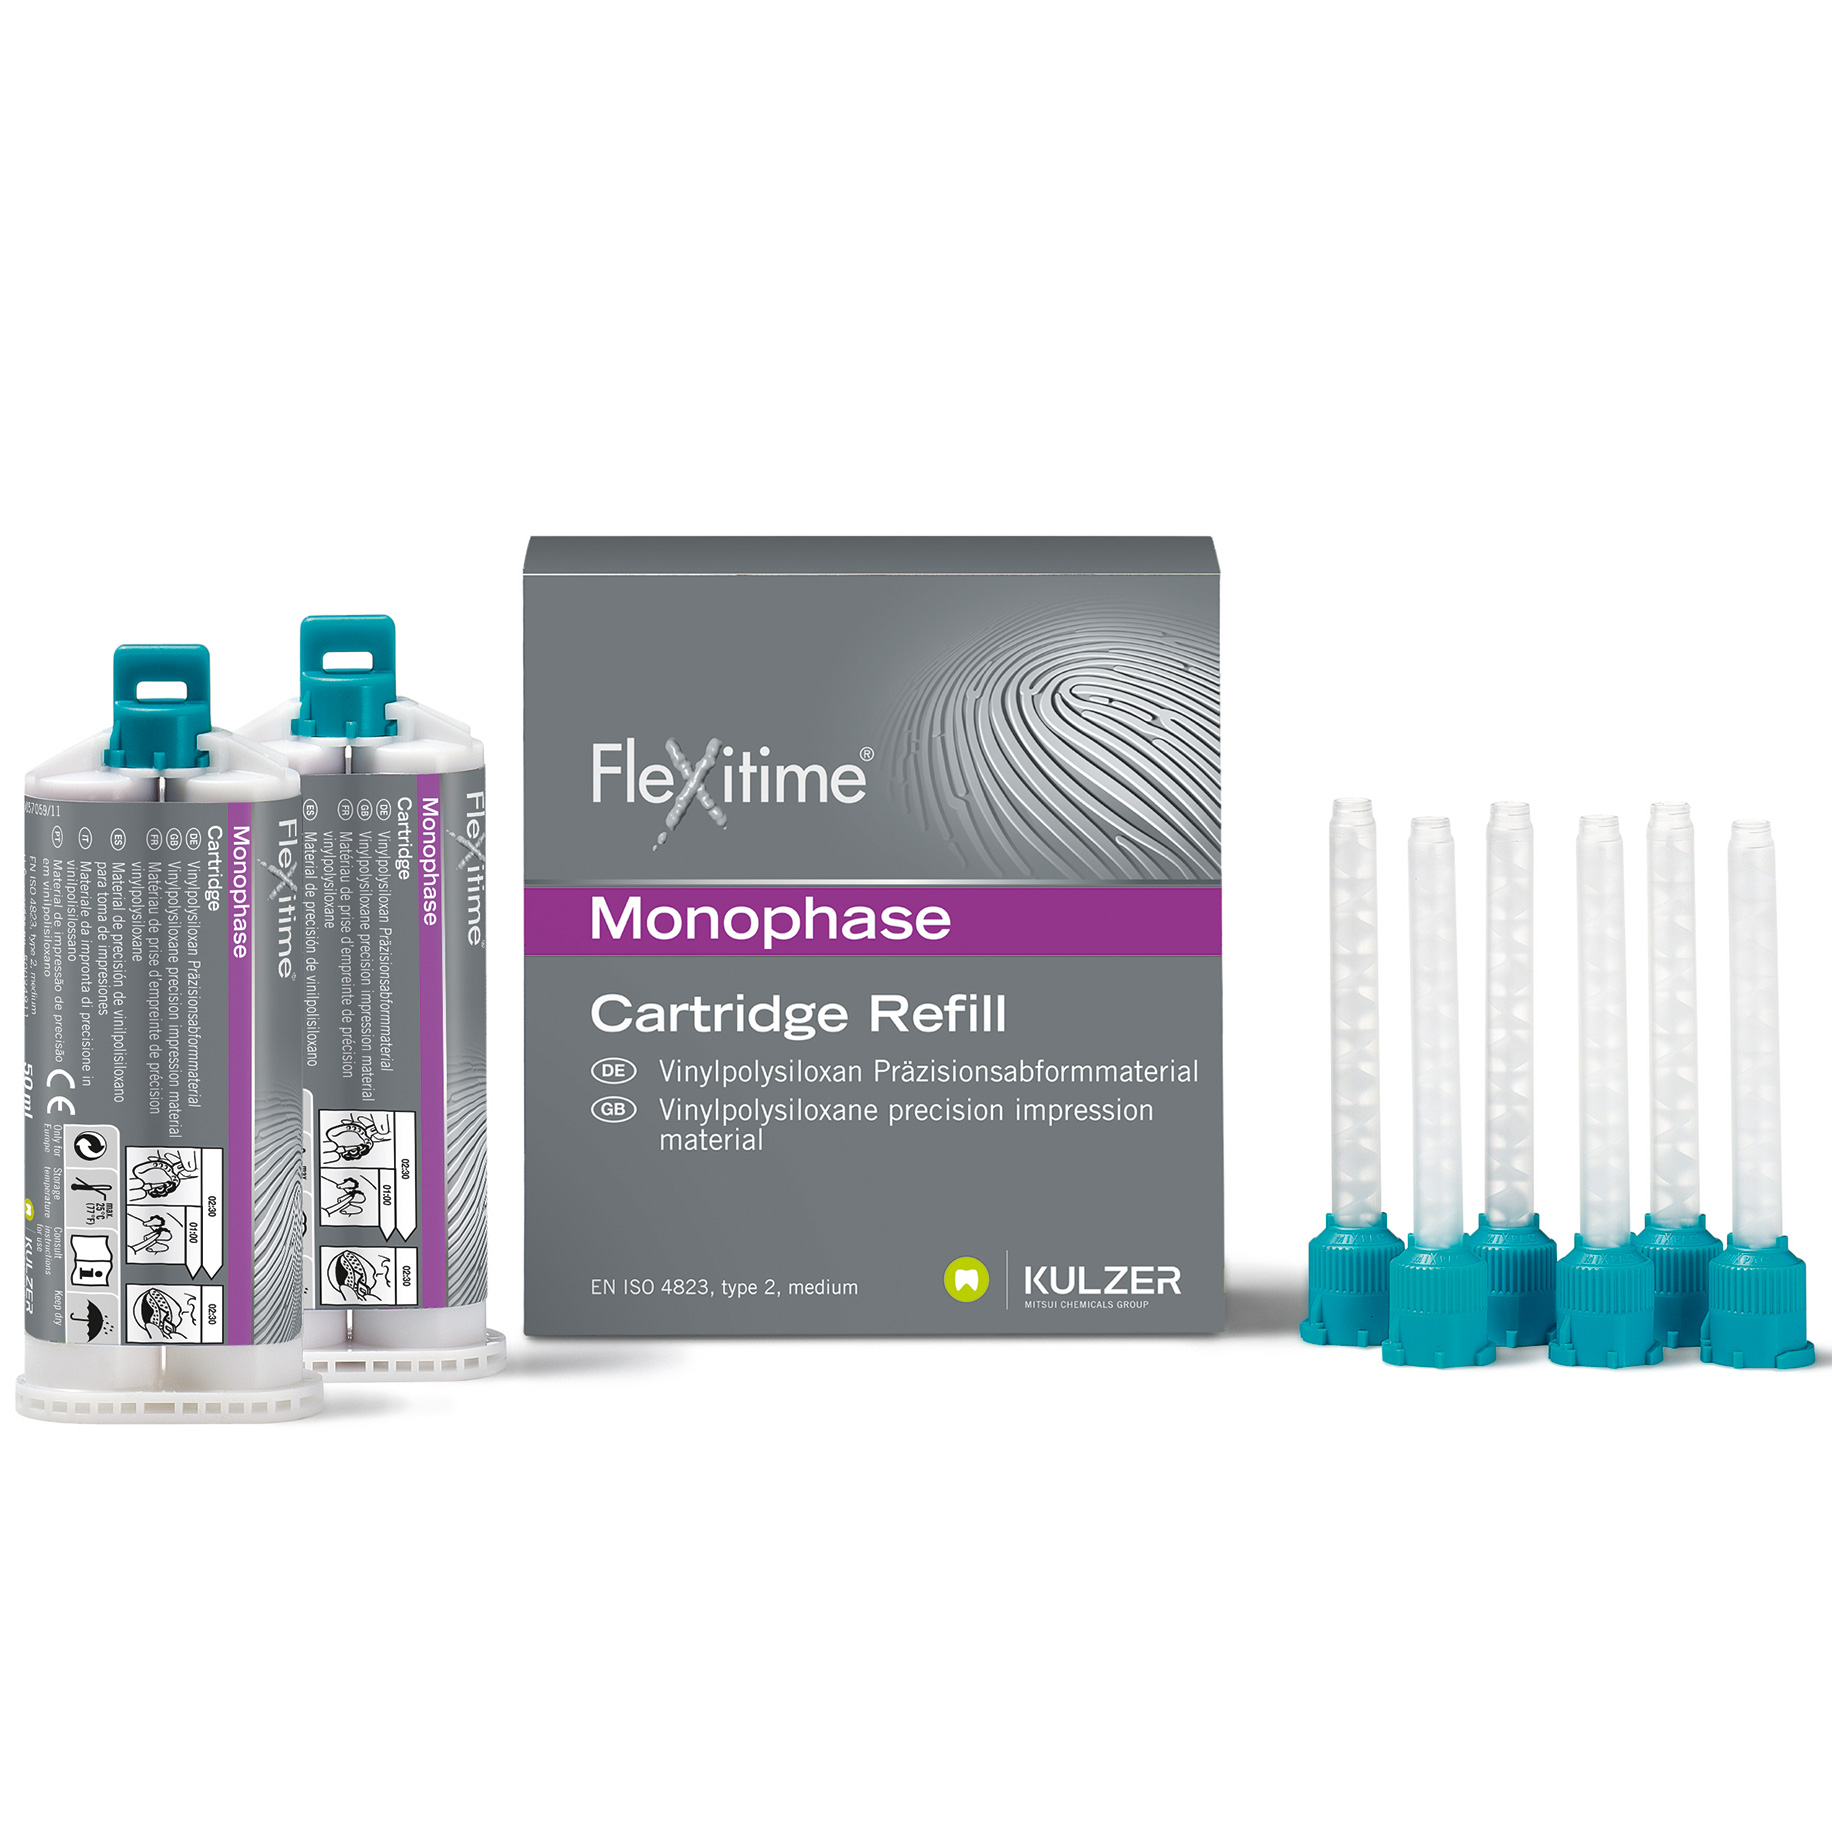 Flexitime Impression Material Automix Monophase Standard Pack 